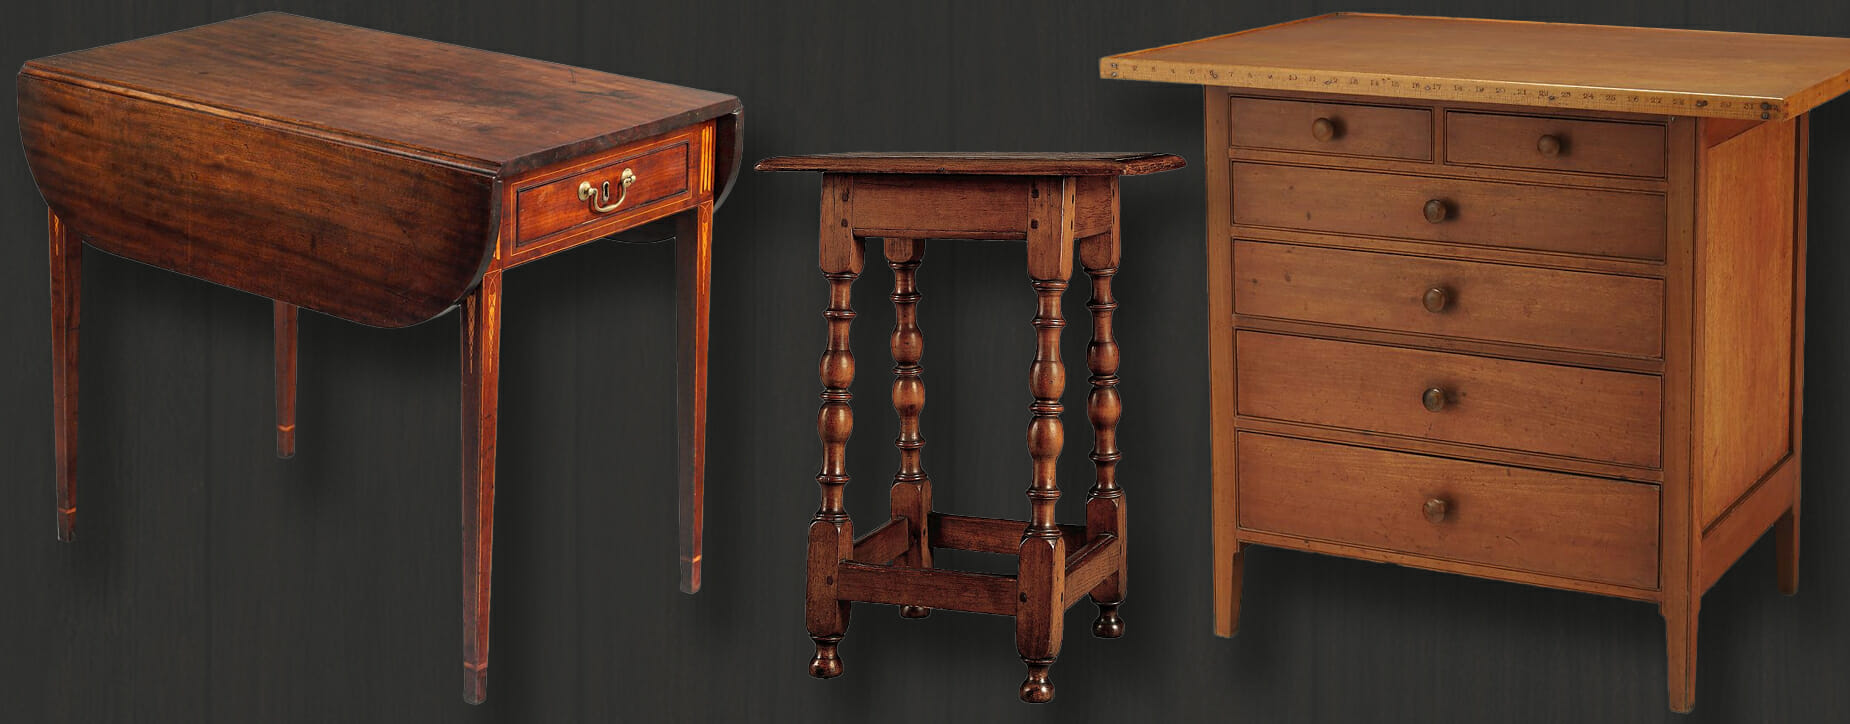 Traditional Furniture Finishes Examples